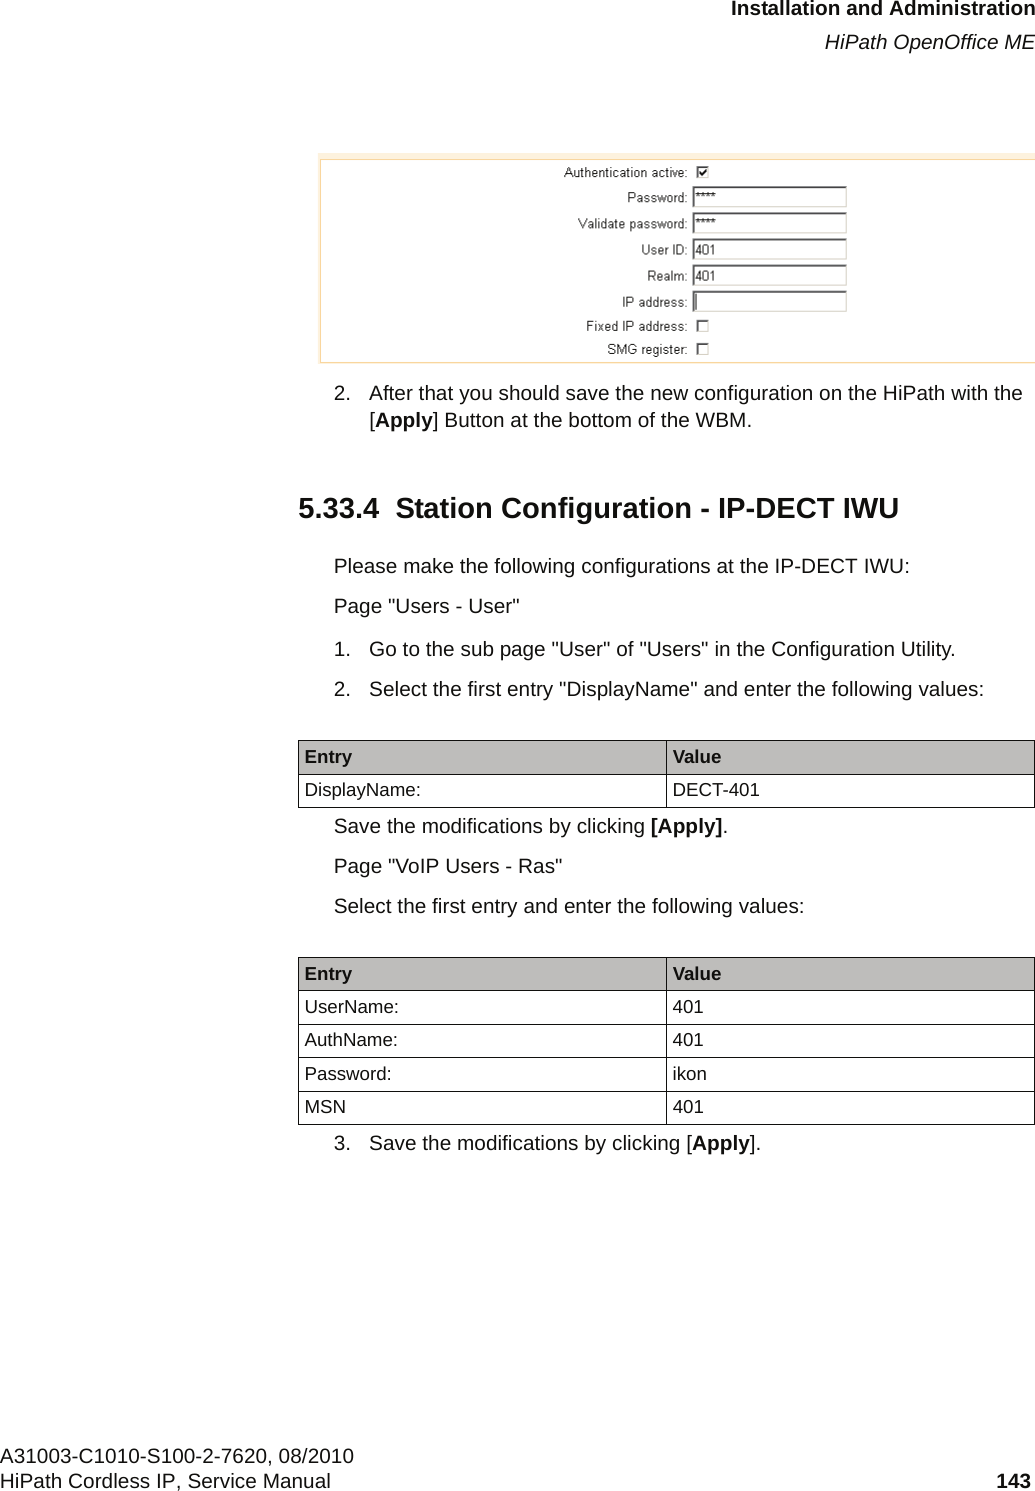 c05_ikon.fmInstallation and AdministrationHiPath OpenOffice MEA31003-C1010-S100-2-7620, 08/2010HiPath Cordless IP, Service Manual 143            2. After that you should save the new configuration on the HiPath with the [Apply] Button at the bottom of the WBM.5.33.4  Station Configuration - IP-DECT IWUPlease make the following configurations at the IP-DECT IWU:Page &quot;Users - User&quot;1. Go to the sub page &quot;User&quot; of &quot;Users&quot; in the Configuration Utility.2. Select the first entry &quot;DisplayName&quot; and enter the following values:Save the modifications by clicking [Apply].Page &quot;VoIP Users - Ras&quot;Select the first entry and enter the following values:3. Save the modifications by clicking [Apply].Entry ValueDisplayName: DECT-401Entry ValueUserName: 401AuthName: 401Password: ikonMSN 401